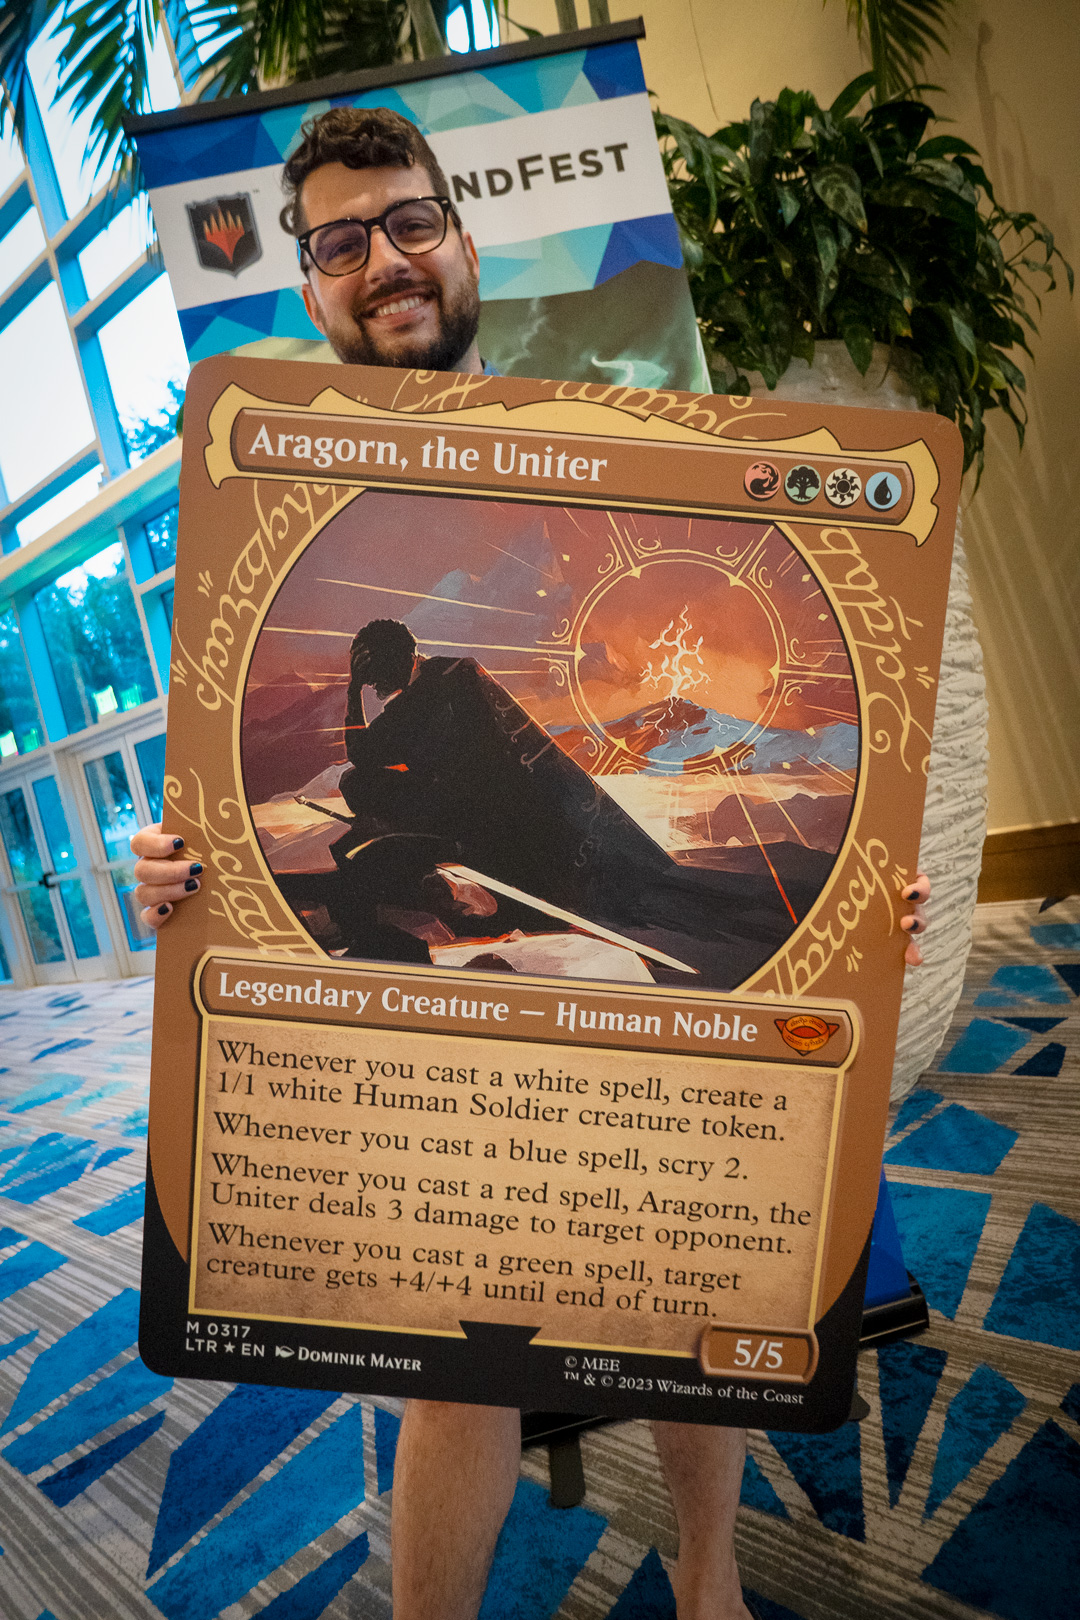 Player holding an oversized card of Aragorn, the Uniter